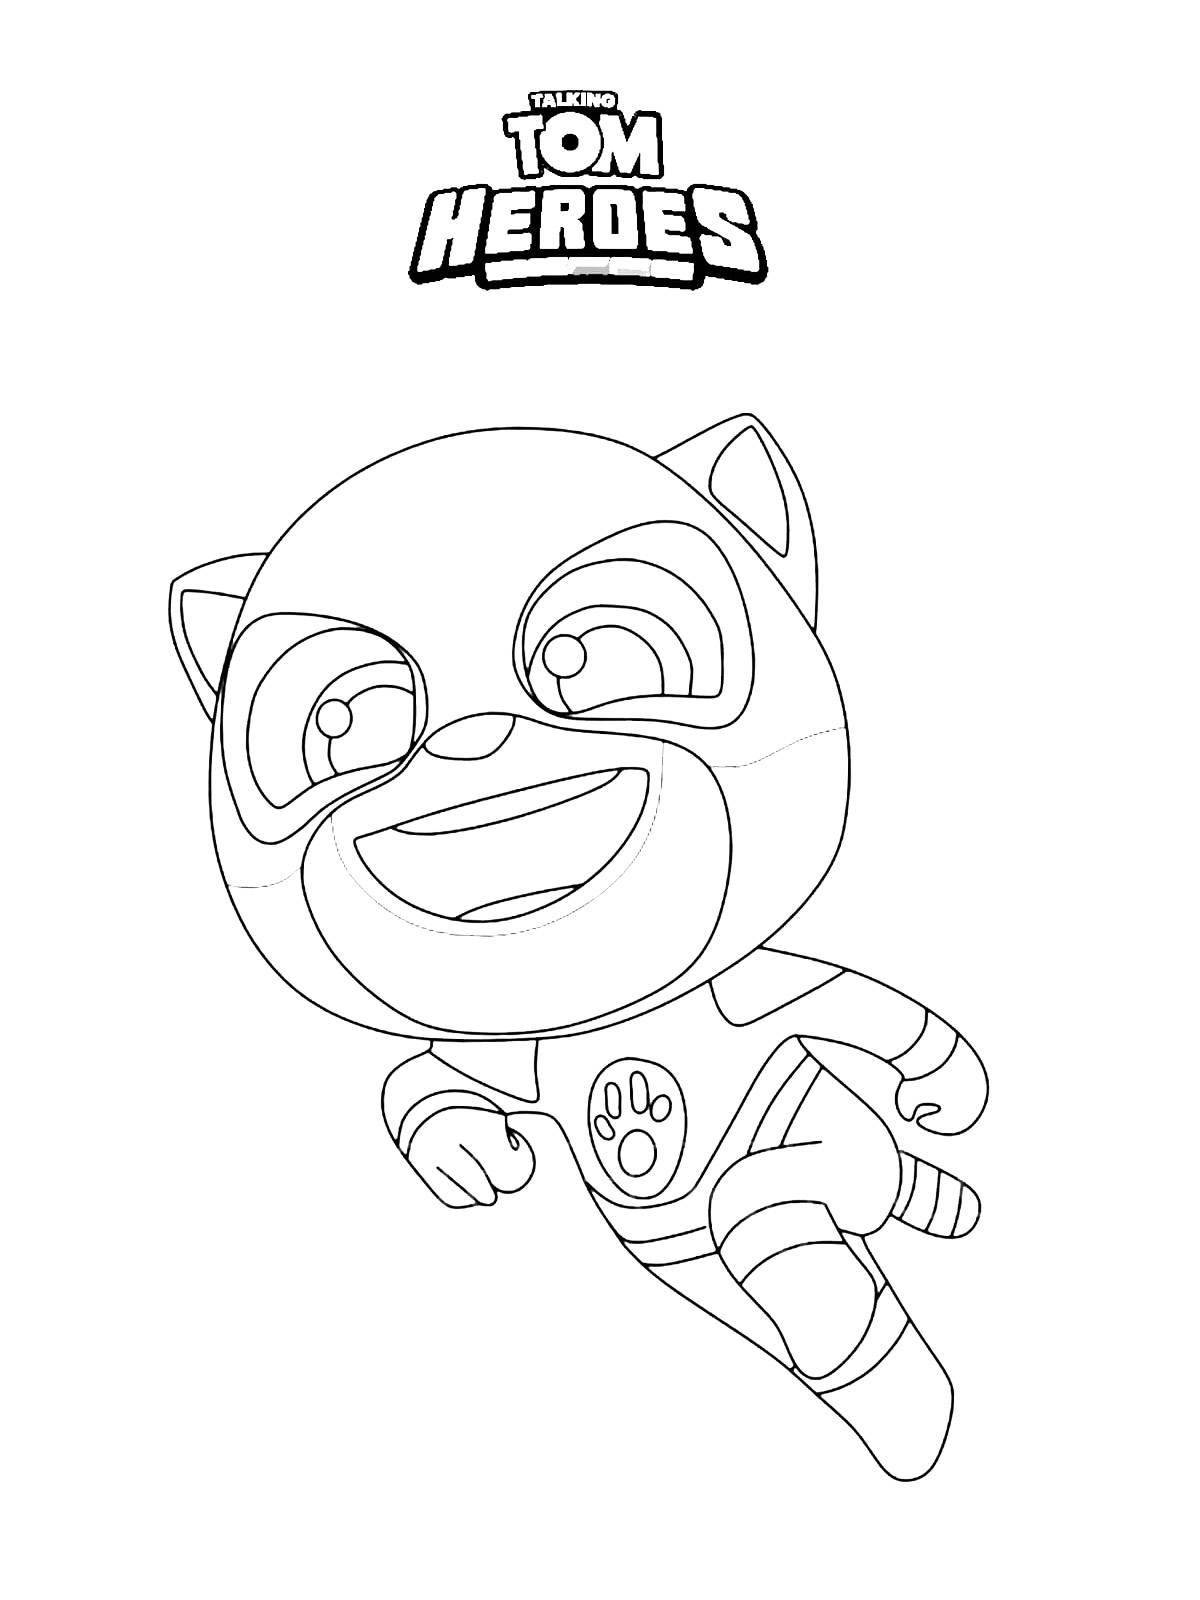 Tom chase's great heroes coloring book